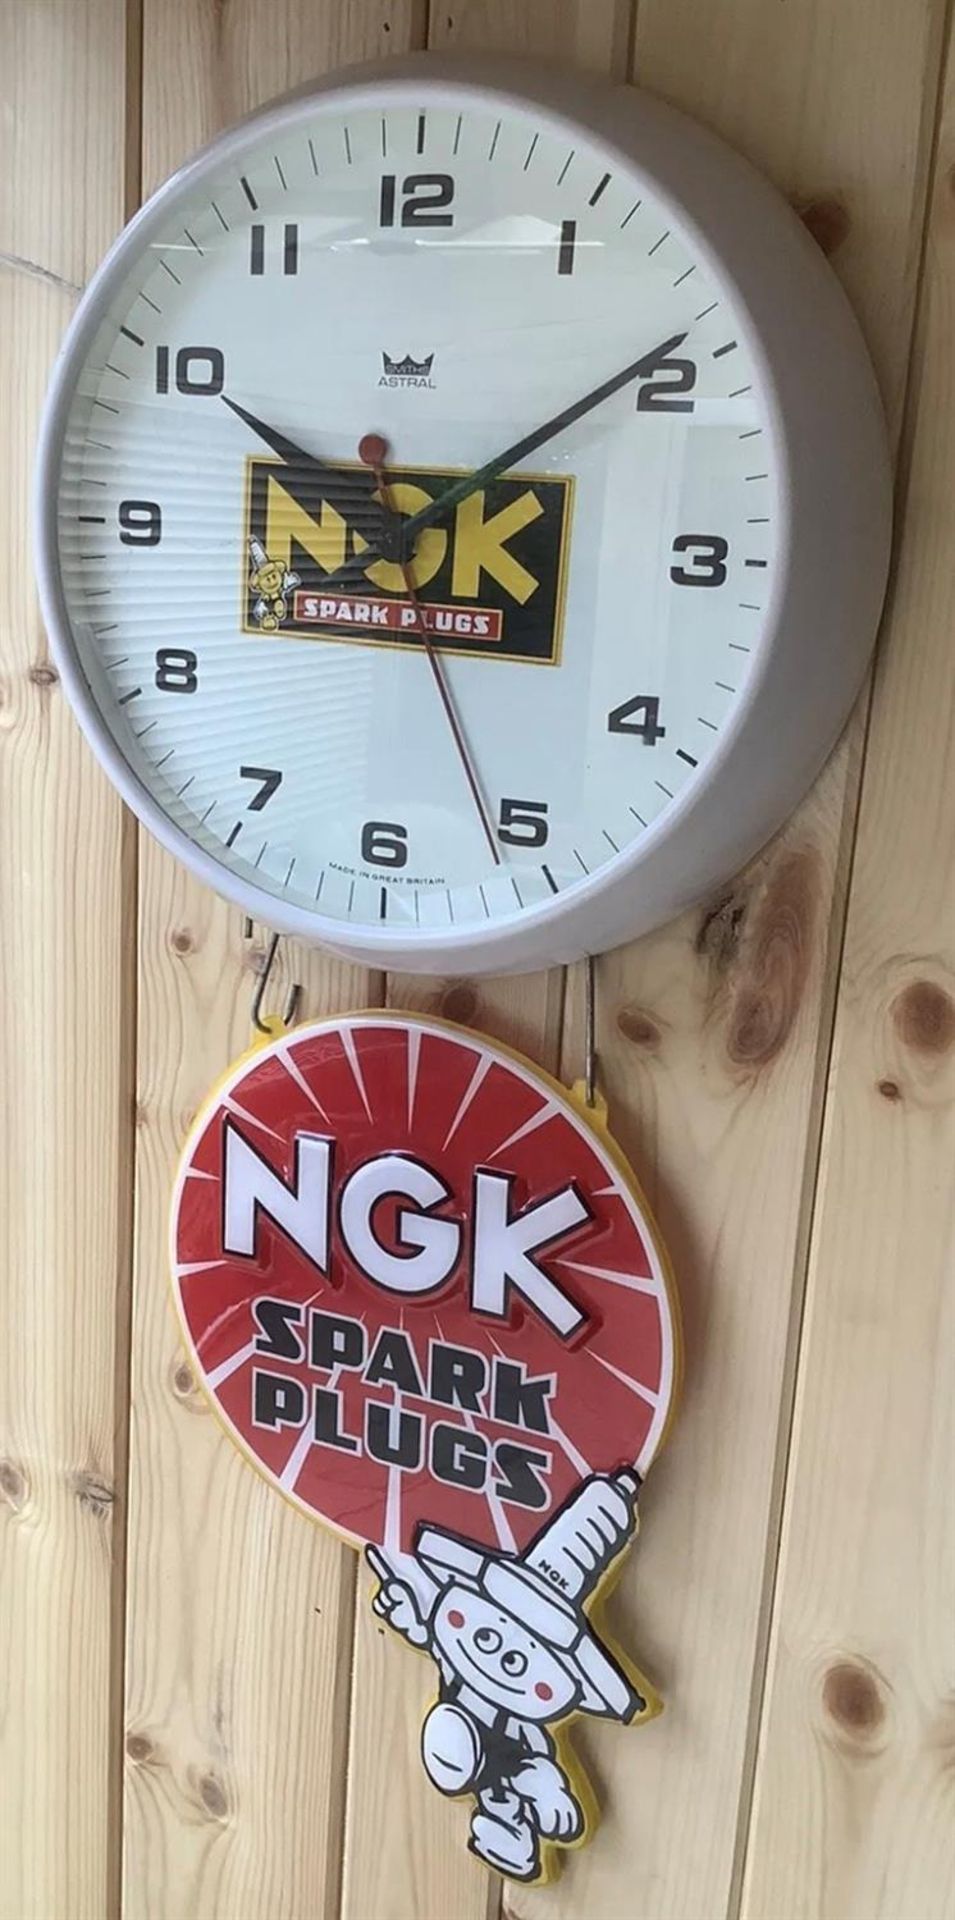 A Rare NGK Spark Plugs 14" Smiths Astral Dial Clock - Image 6 of 9